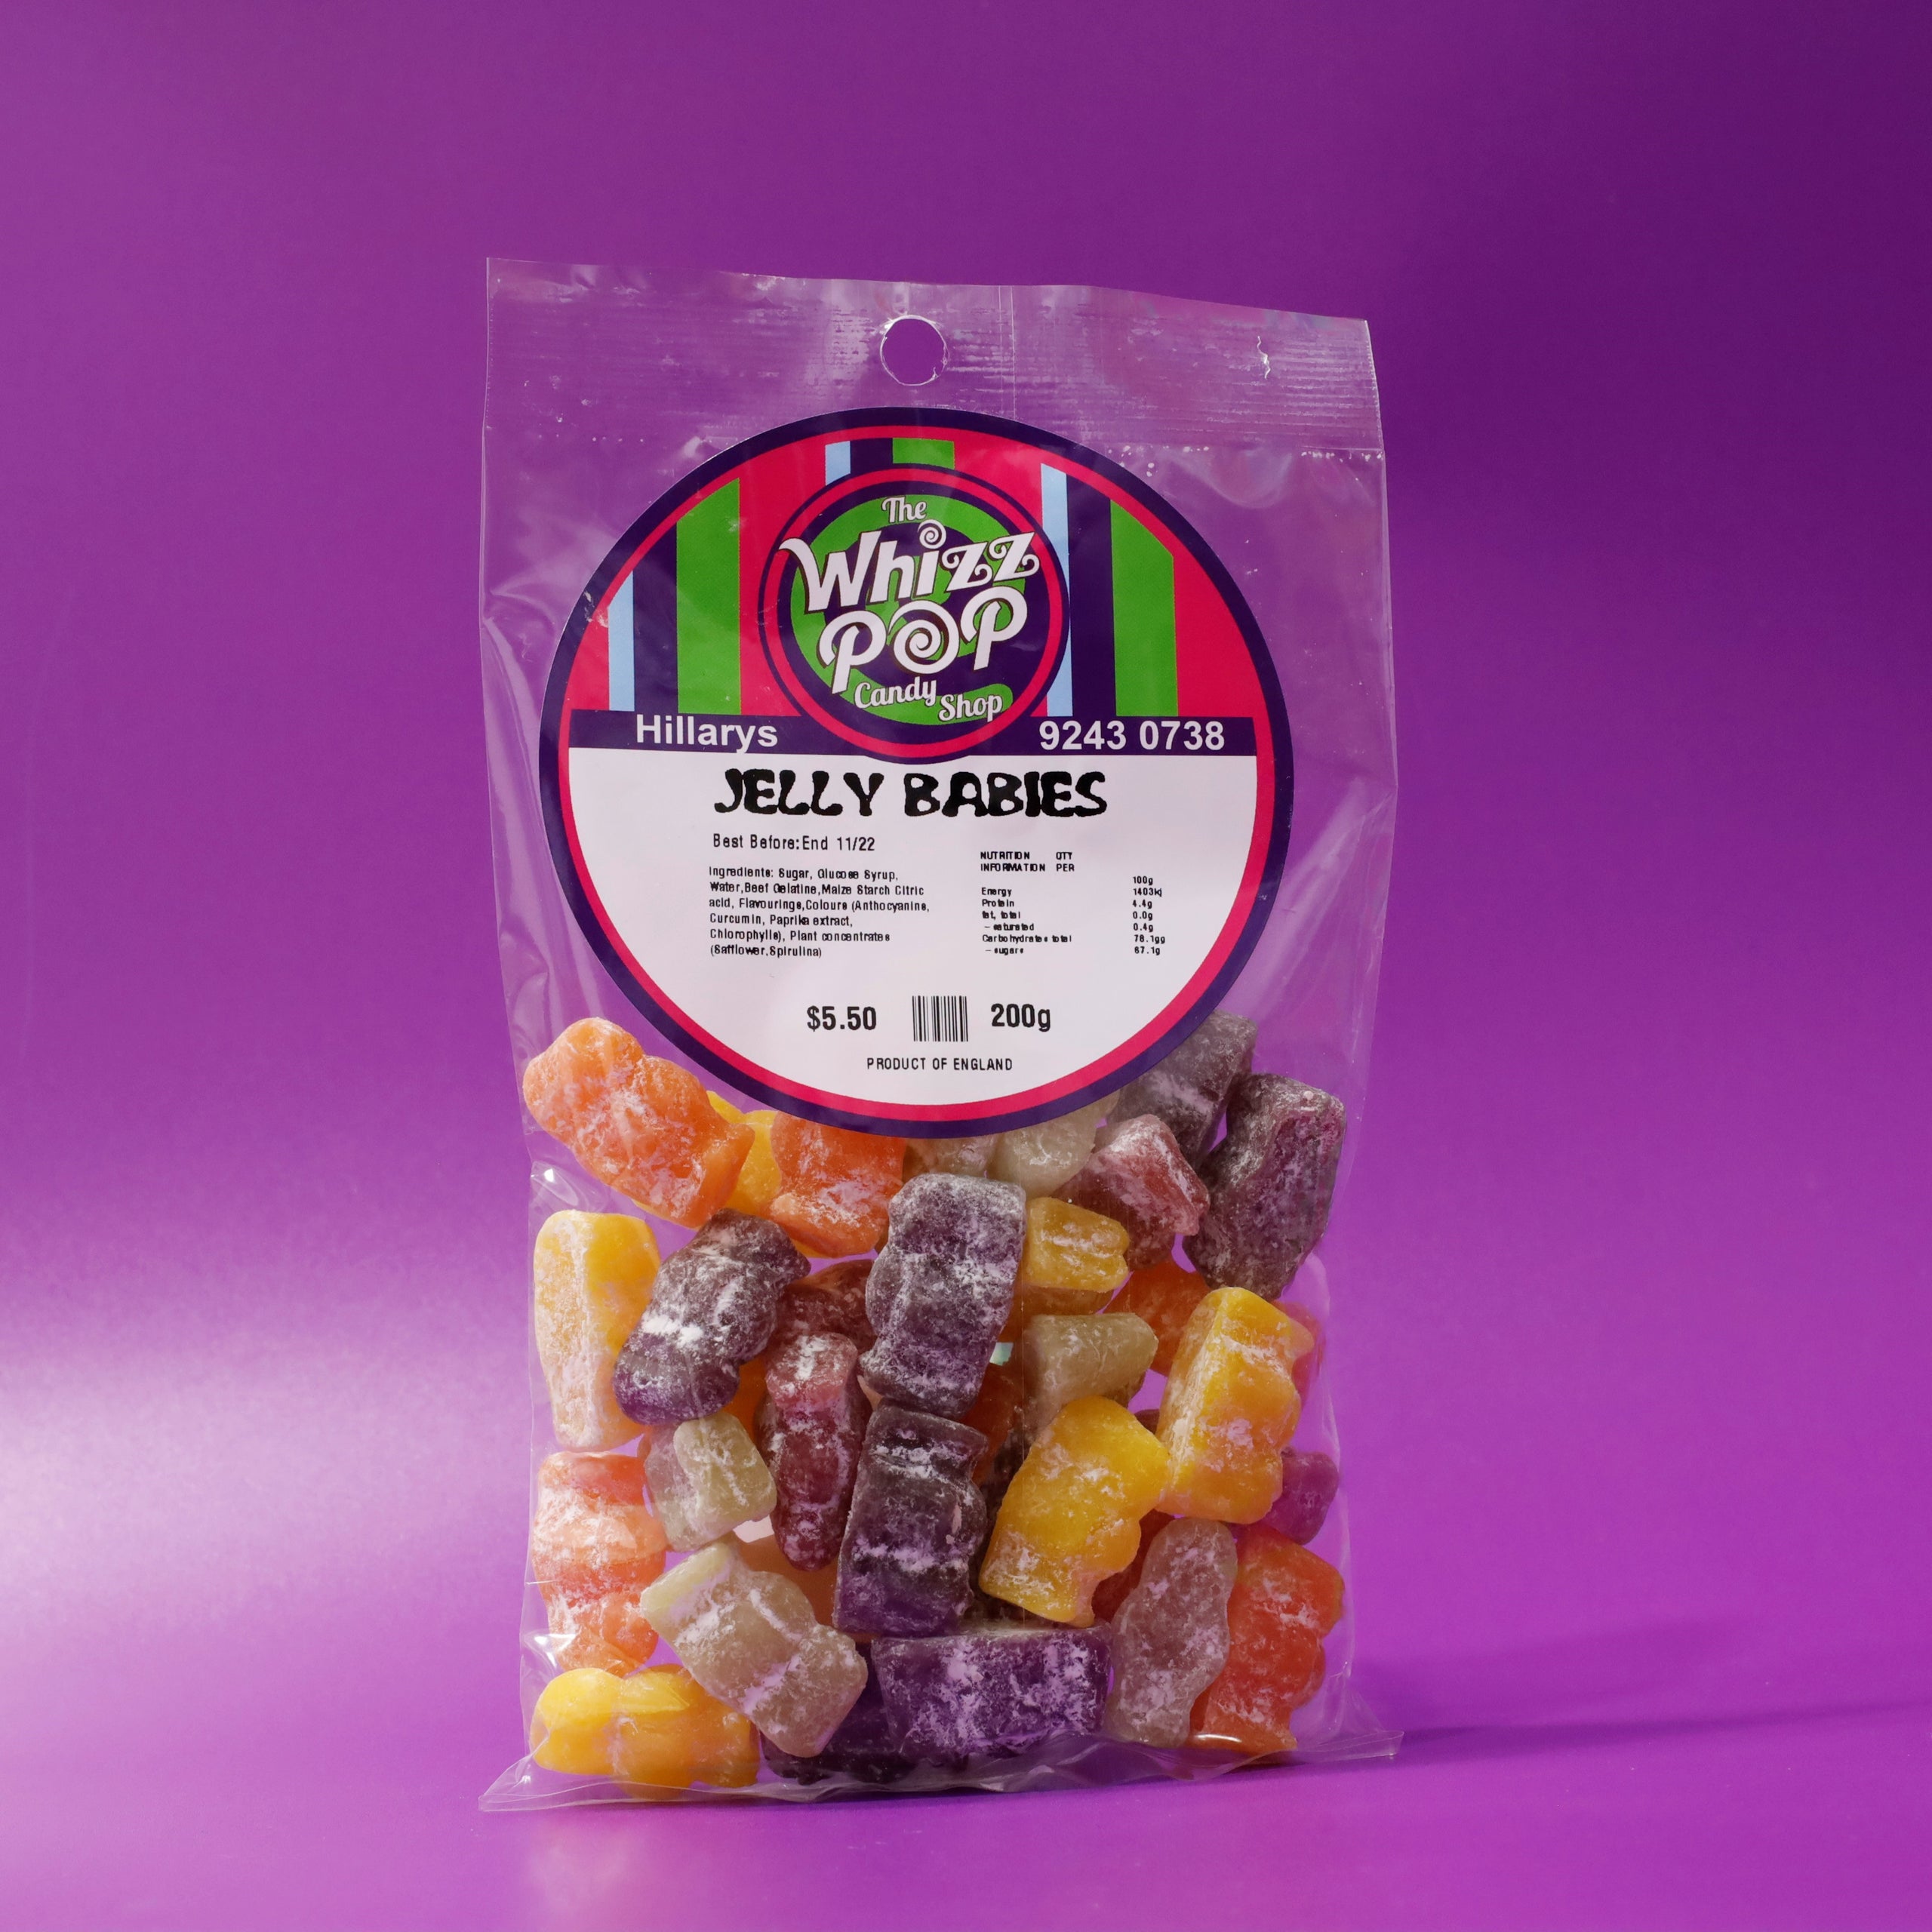 English Dusted Jelly Babies | The Whizz Pop Candy Shop